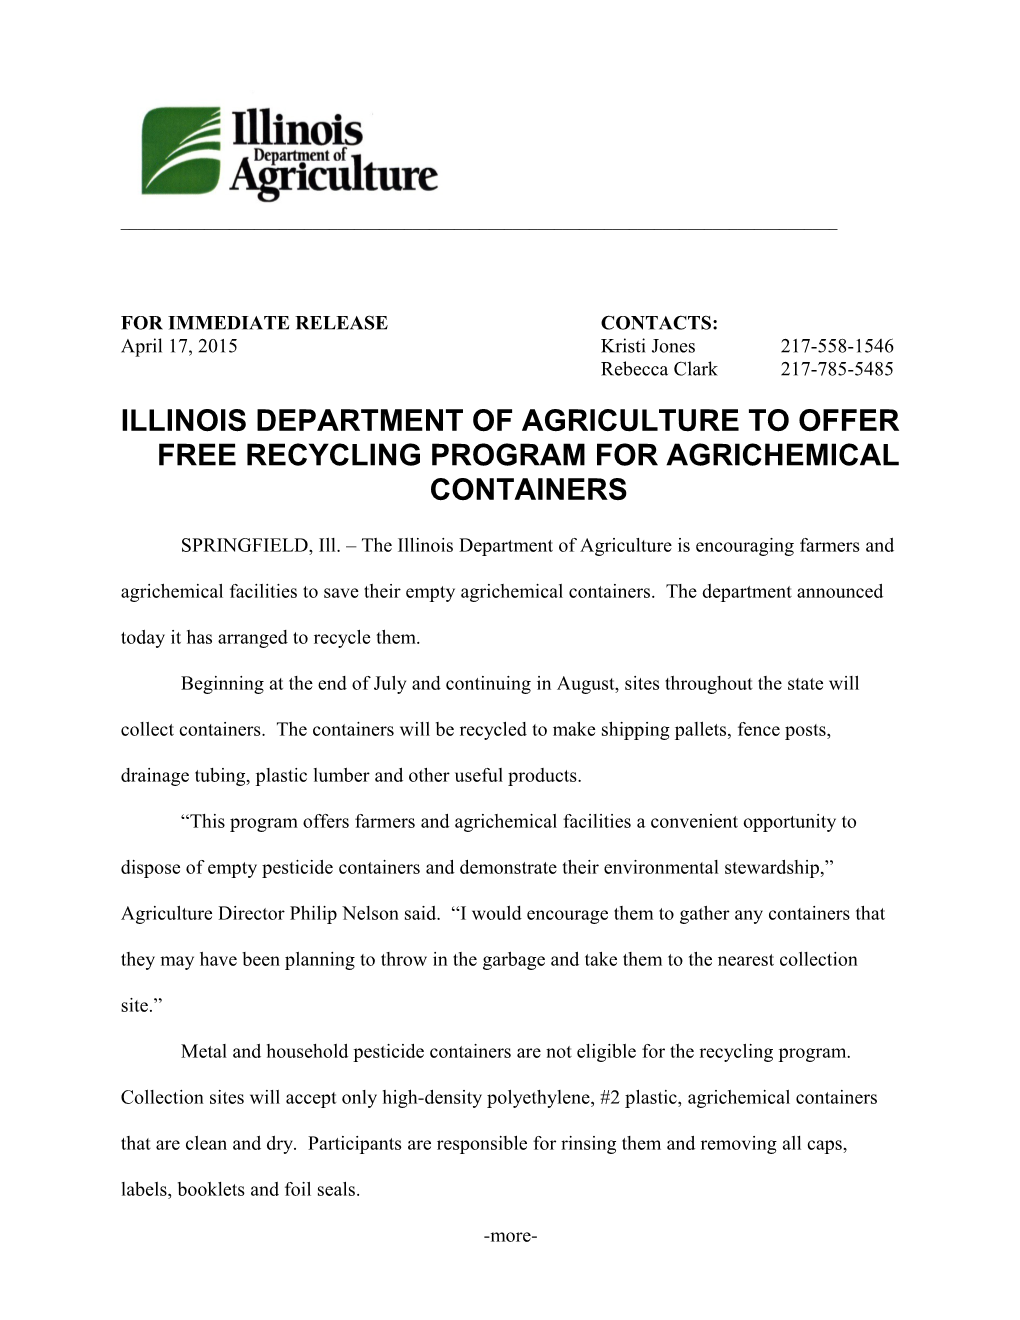 Illinois Department of Agriculture to Offer Free Recycling Program for Agrichemical Containers